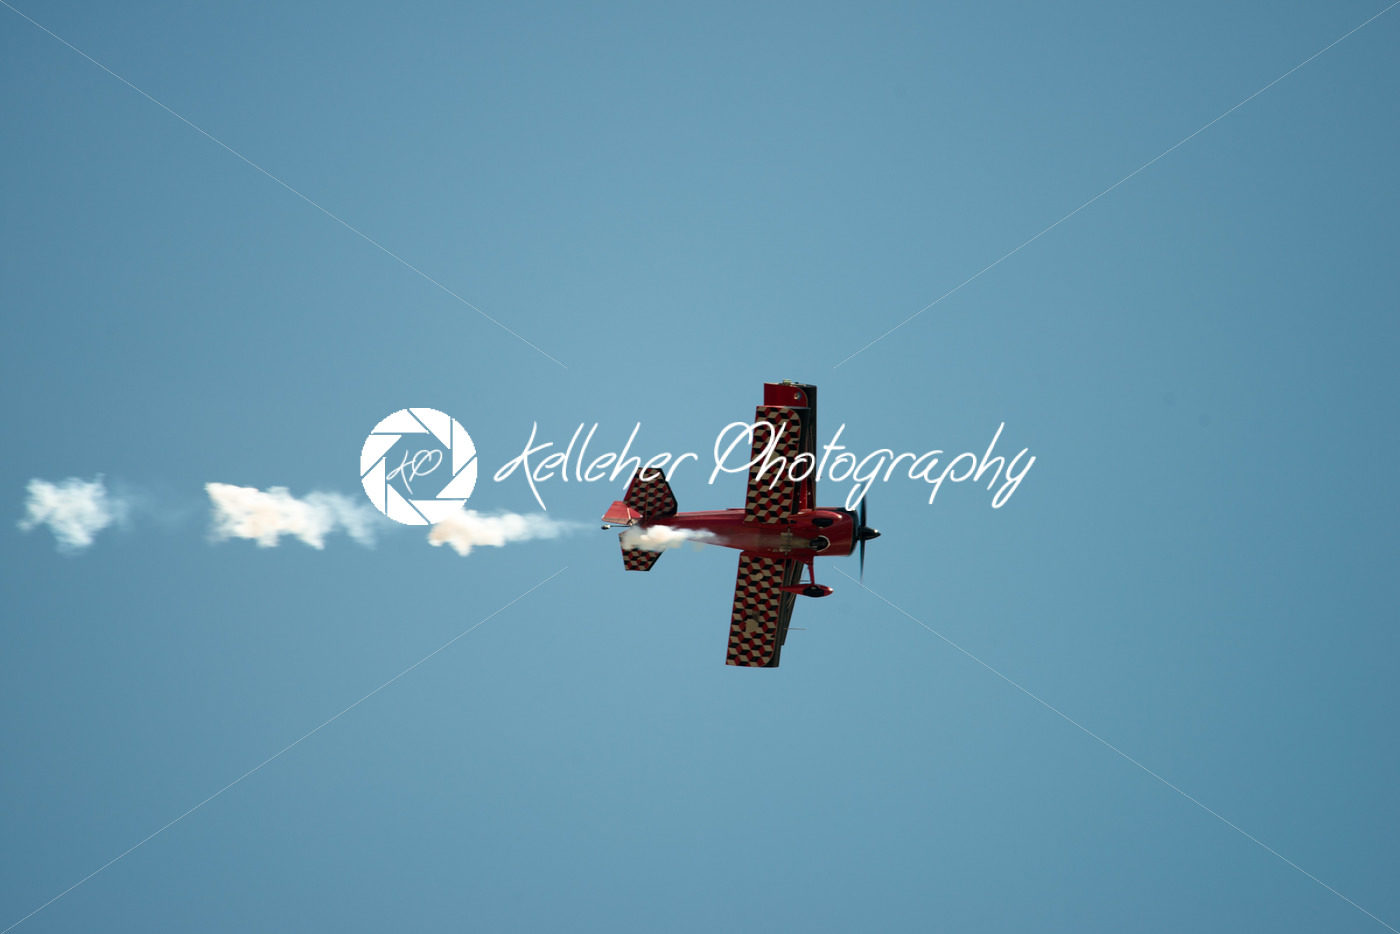 ATLANTIC CITY, NJ – AUGUST 17: Bi-Plane performing at Annual Atlantic City Air Show on August 17, 2016 - Kelleher Photography Store